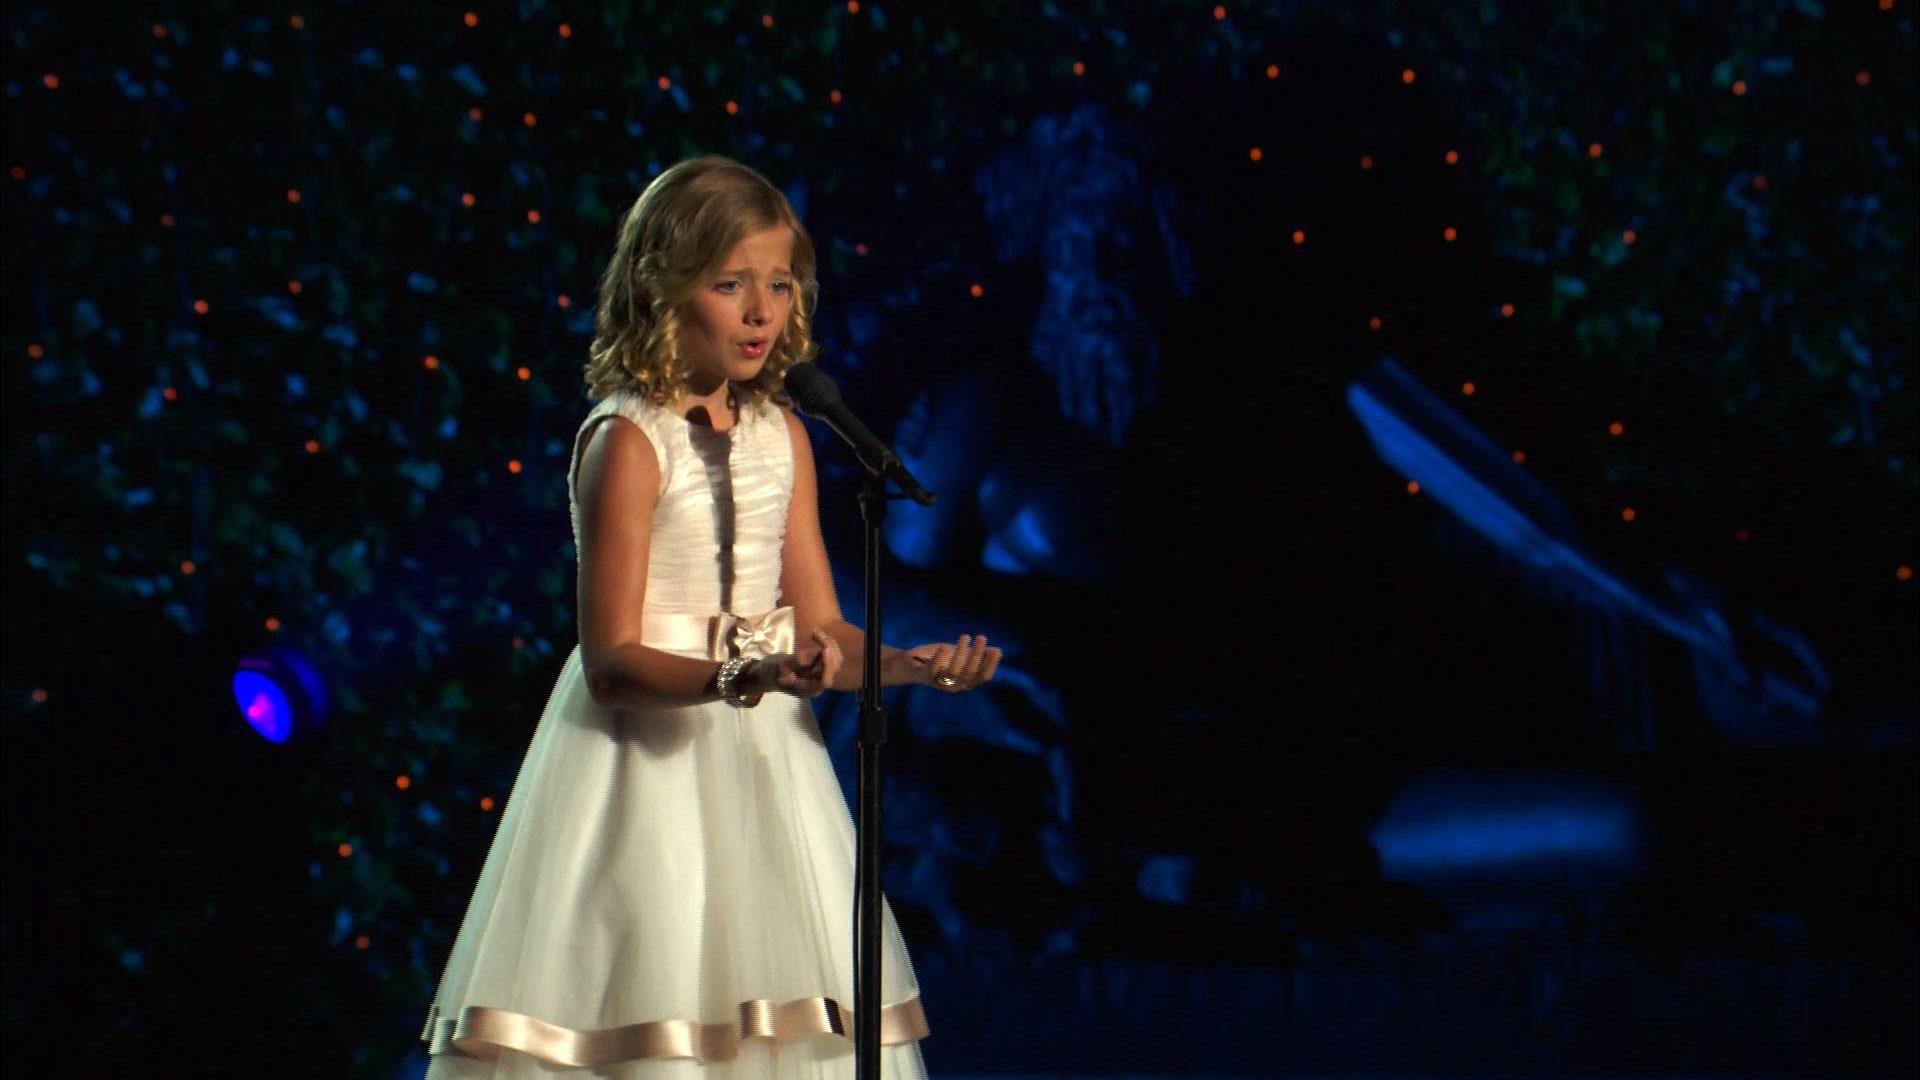 Jackie Evancho: Dream with Me in Concert. Jackie Evancho sings